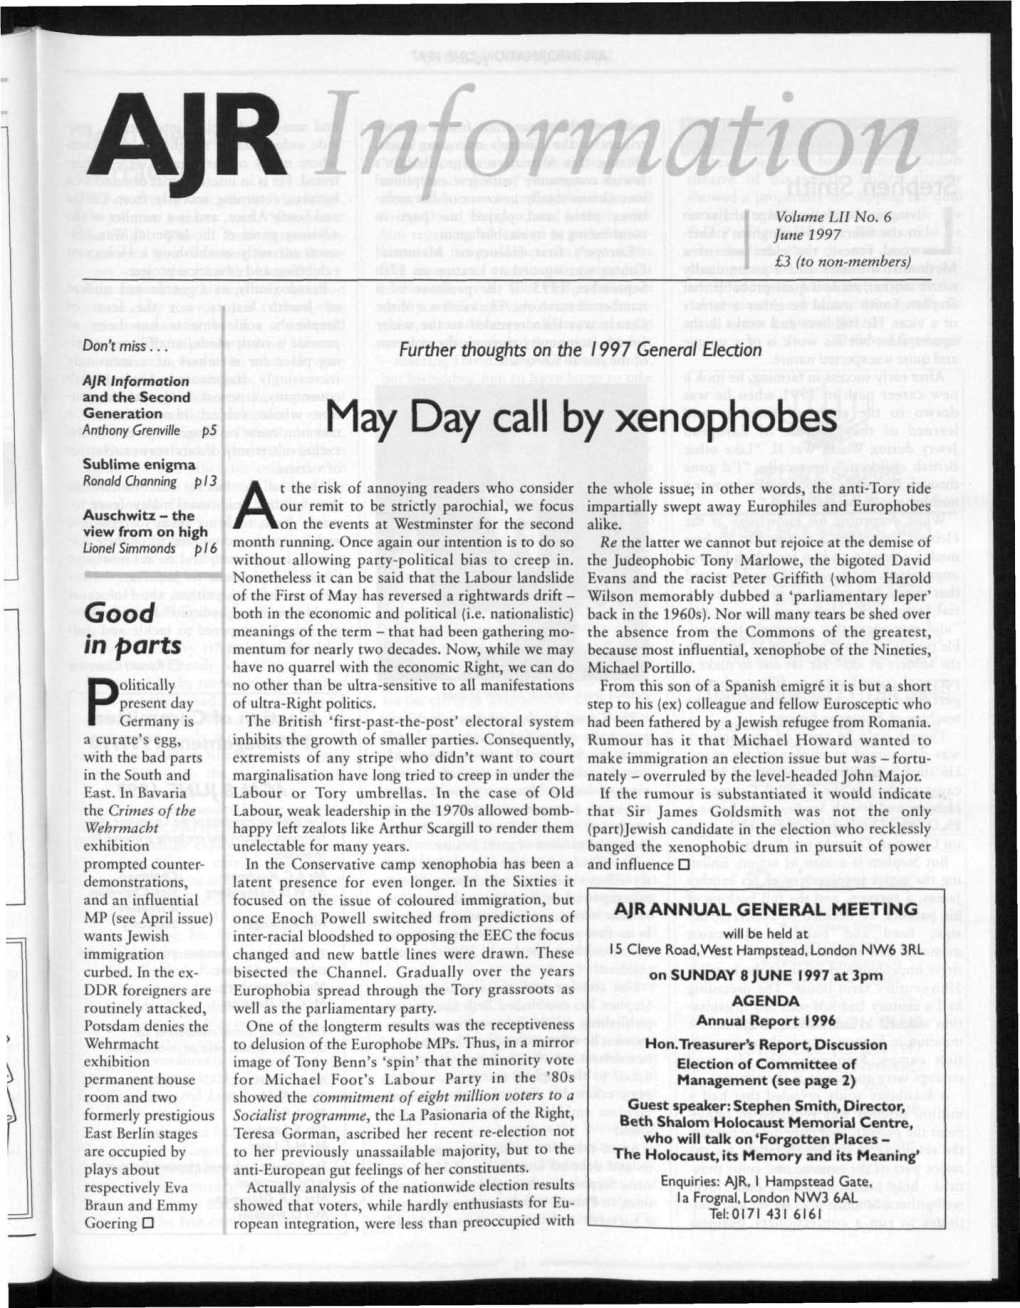 May Day Call by Xenophobes